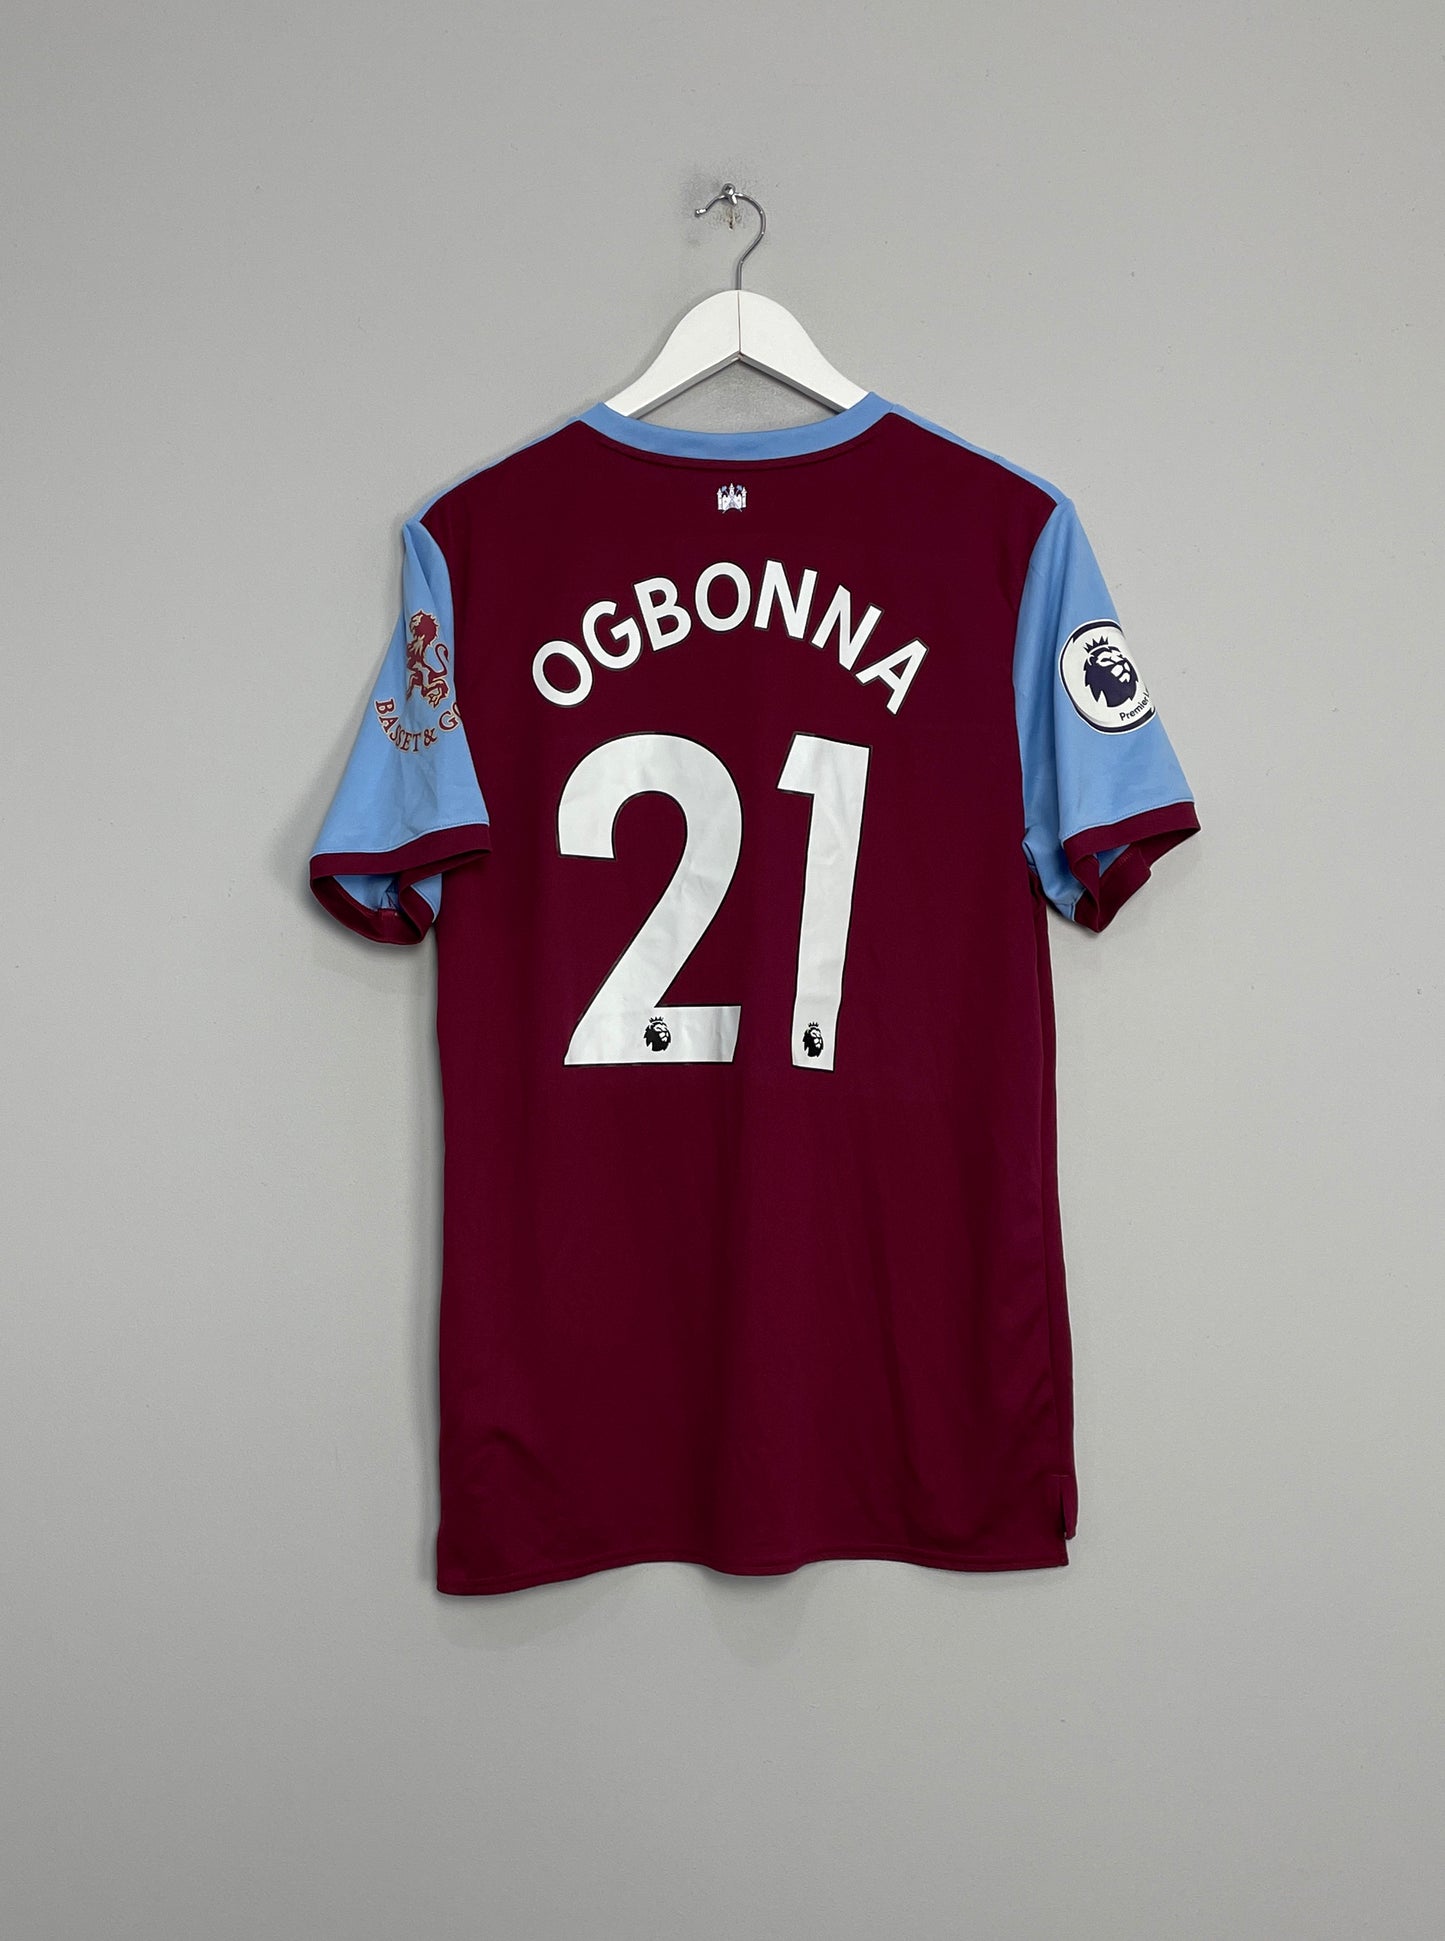 Image of the West Ham Ogbonna shirt from the 2019/20 season